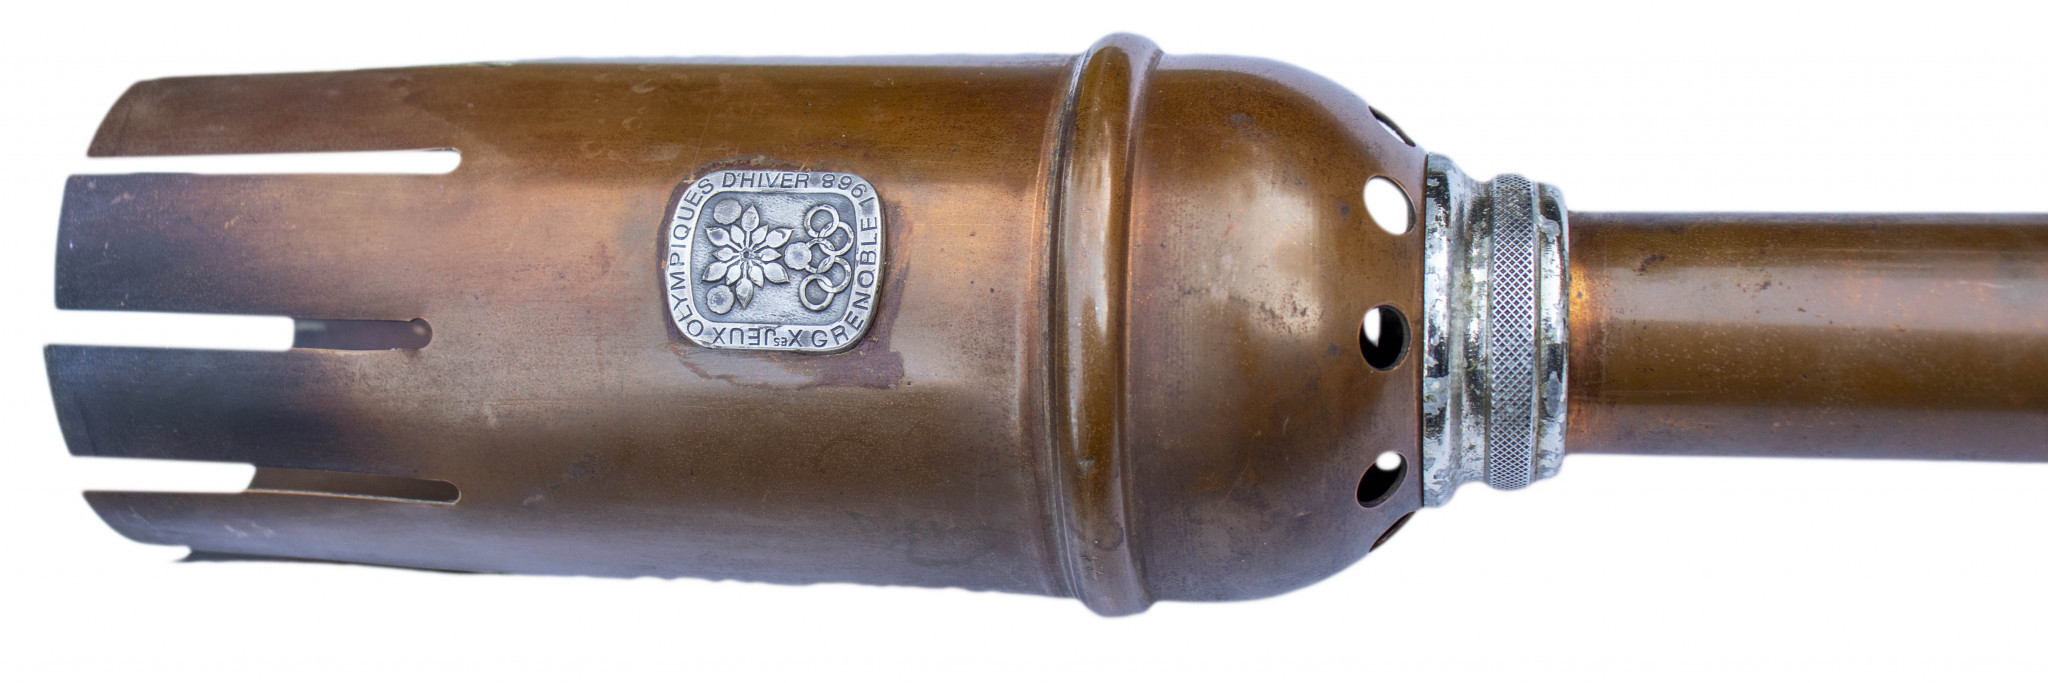 A Grenoble 1968 Olympic Torch sold in January raised more than $200,000 at auction ©Nate D. Sanders Auctions